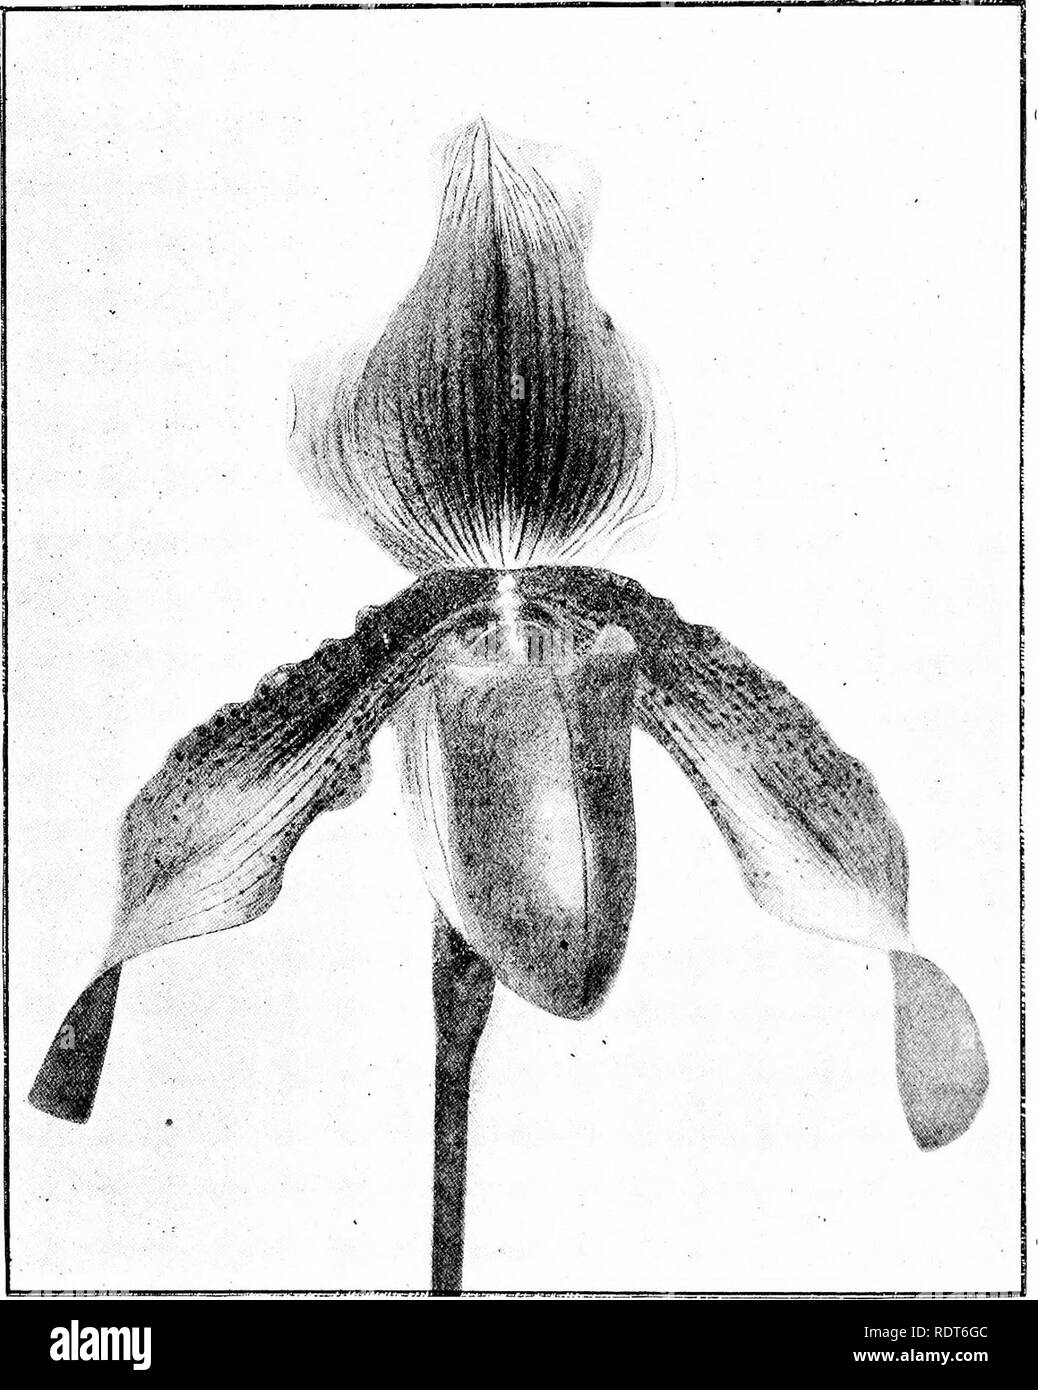 . The orchid stud-book: an enumeration of hybrid orchids of artificial origin, with their parents, raisers, date of first flowering, references to descriptions and figures, and synonymy. With an historical introduction and 120 figures and a chapter on hybridising and raising orchids from seed. Orchids. 194 THE ORCHID STUD-BOOK. [Part II. C. X pleistochlorum, G.C. 1887, ii. 552; O.R. 1893, 196 ; V. Man.O. iv. 95: DayO. Draw. Ii. t. 1. 466. P. X plumosum (barbatum xoenanthum).—Statter, 1895. C. x plumosum, G.C. 1895, ii. 655; O.R. 1896, 30.. Fig. 71. I'APHIOPEDILUM X PORPHYROCHLAMYS. 467. P. X P Stock Photo